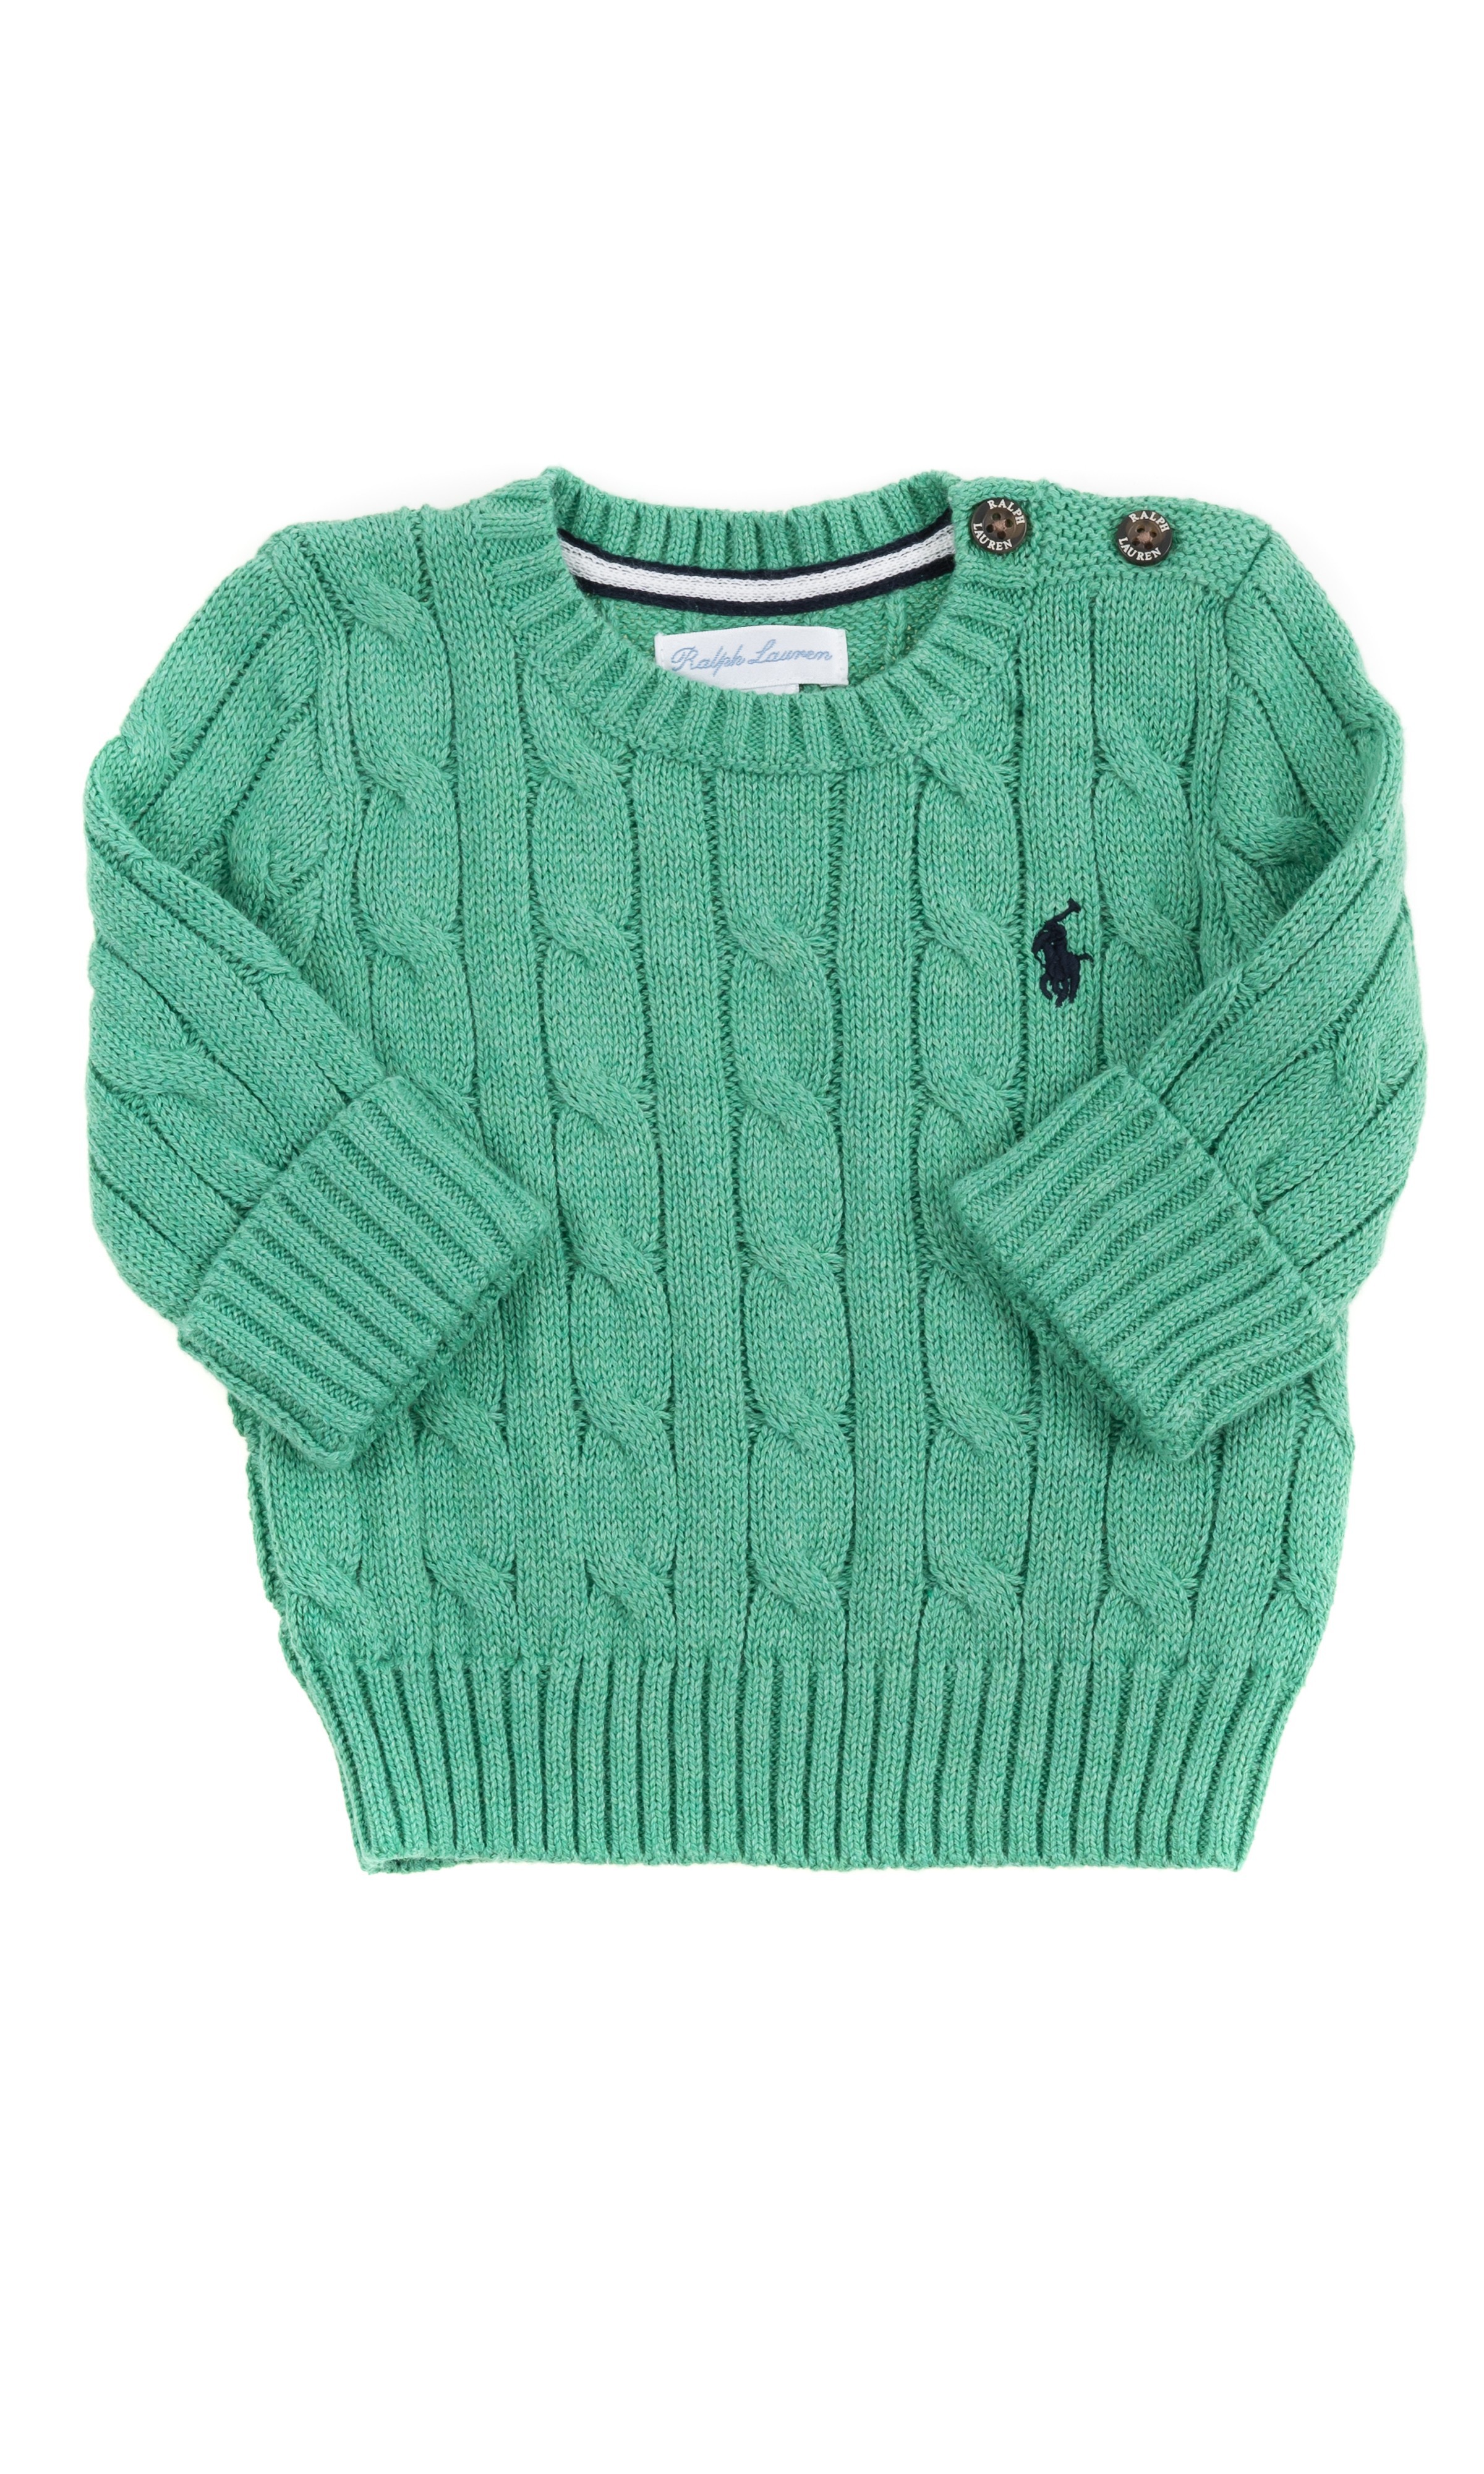 cable stitched sweater, Polo Ralph Lauren - Celebrity-Club